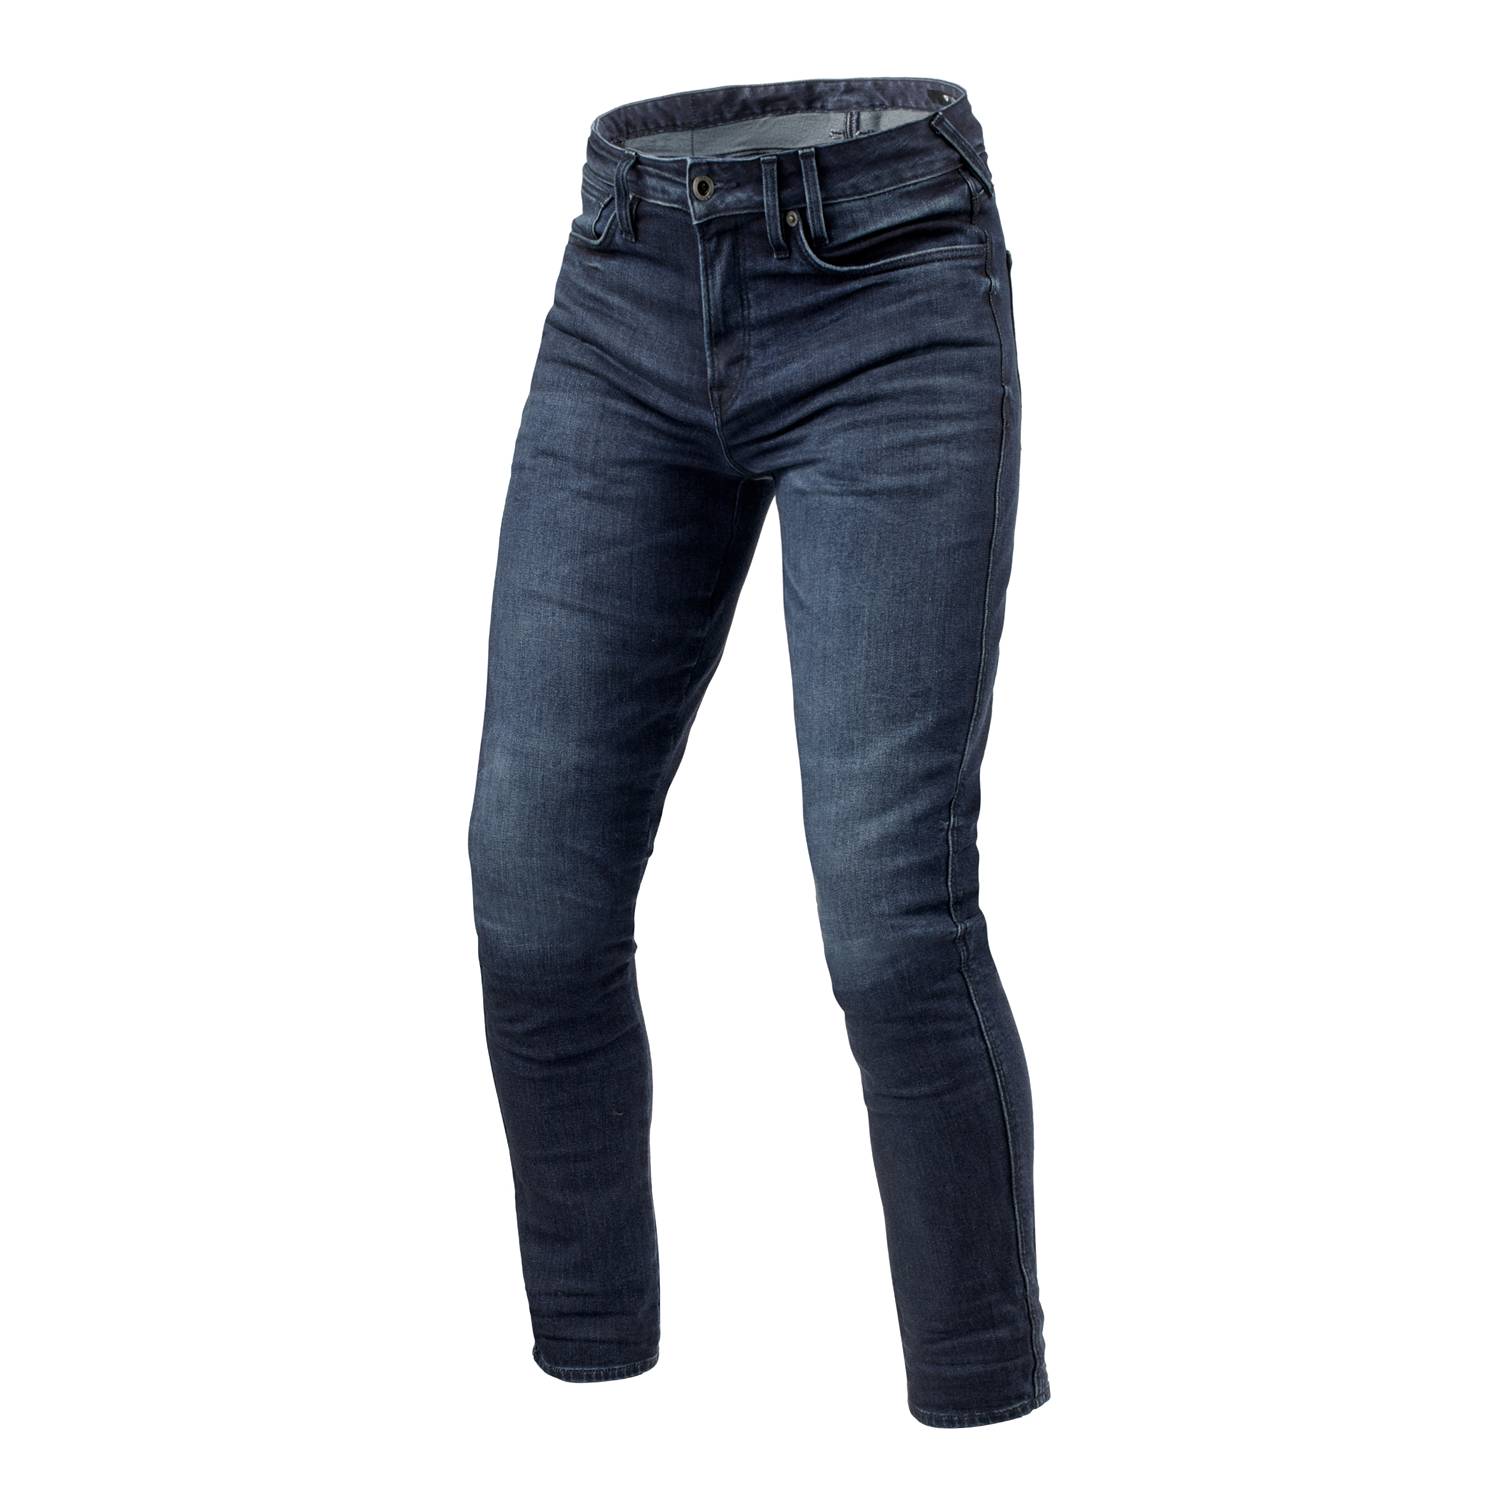 Image of REV'IT! Jeans Carlin SK Dark Blue Used L36 Motorcycle Jeans Size L36/W33 ID 8700001376556